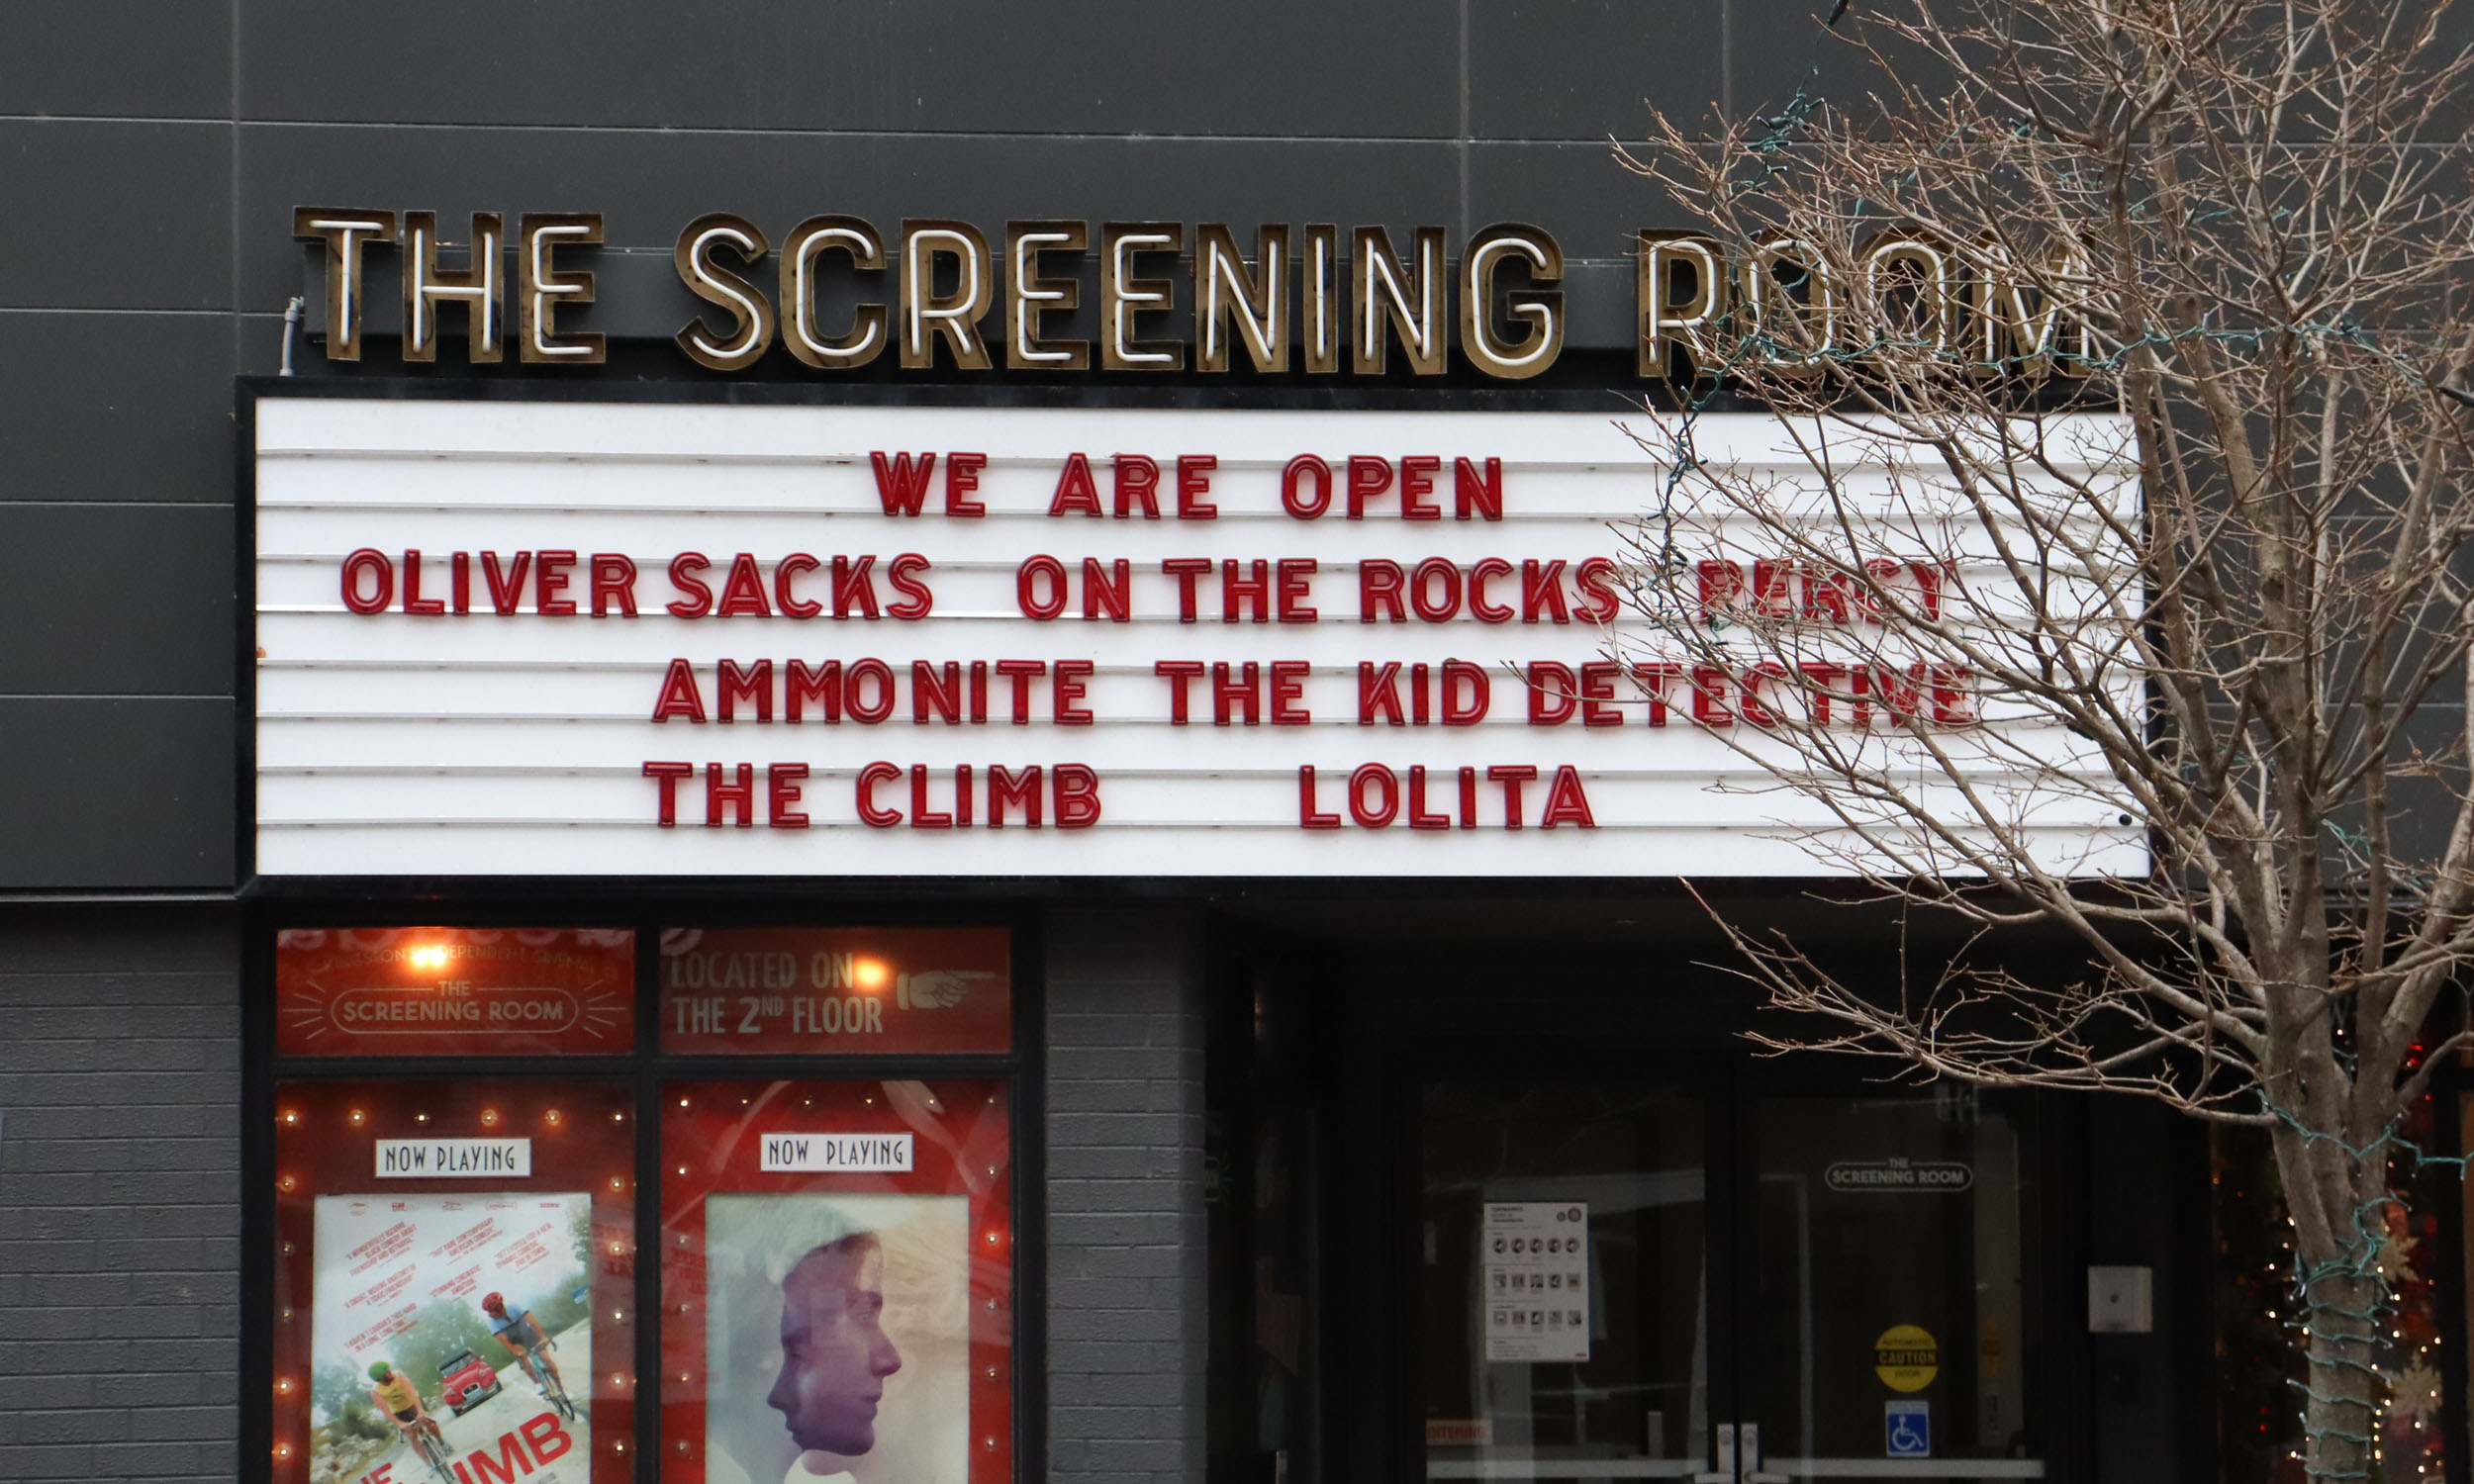 Image of outdoor sign for the screening room. It reads "We are open", with movie titles following.